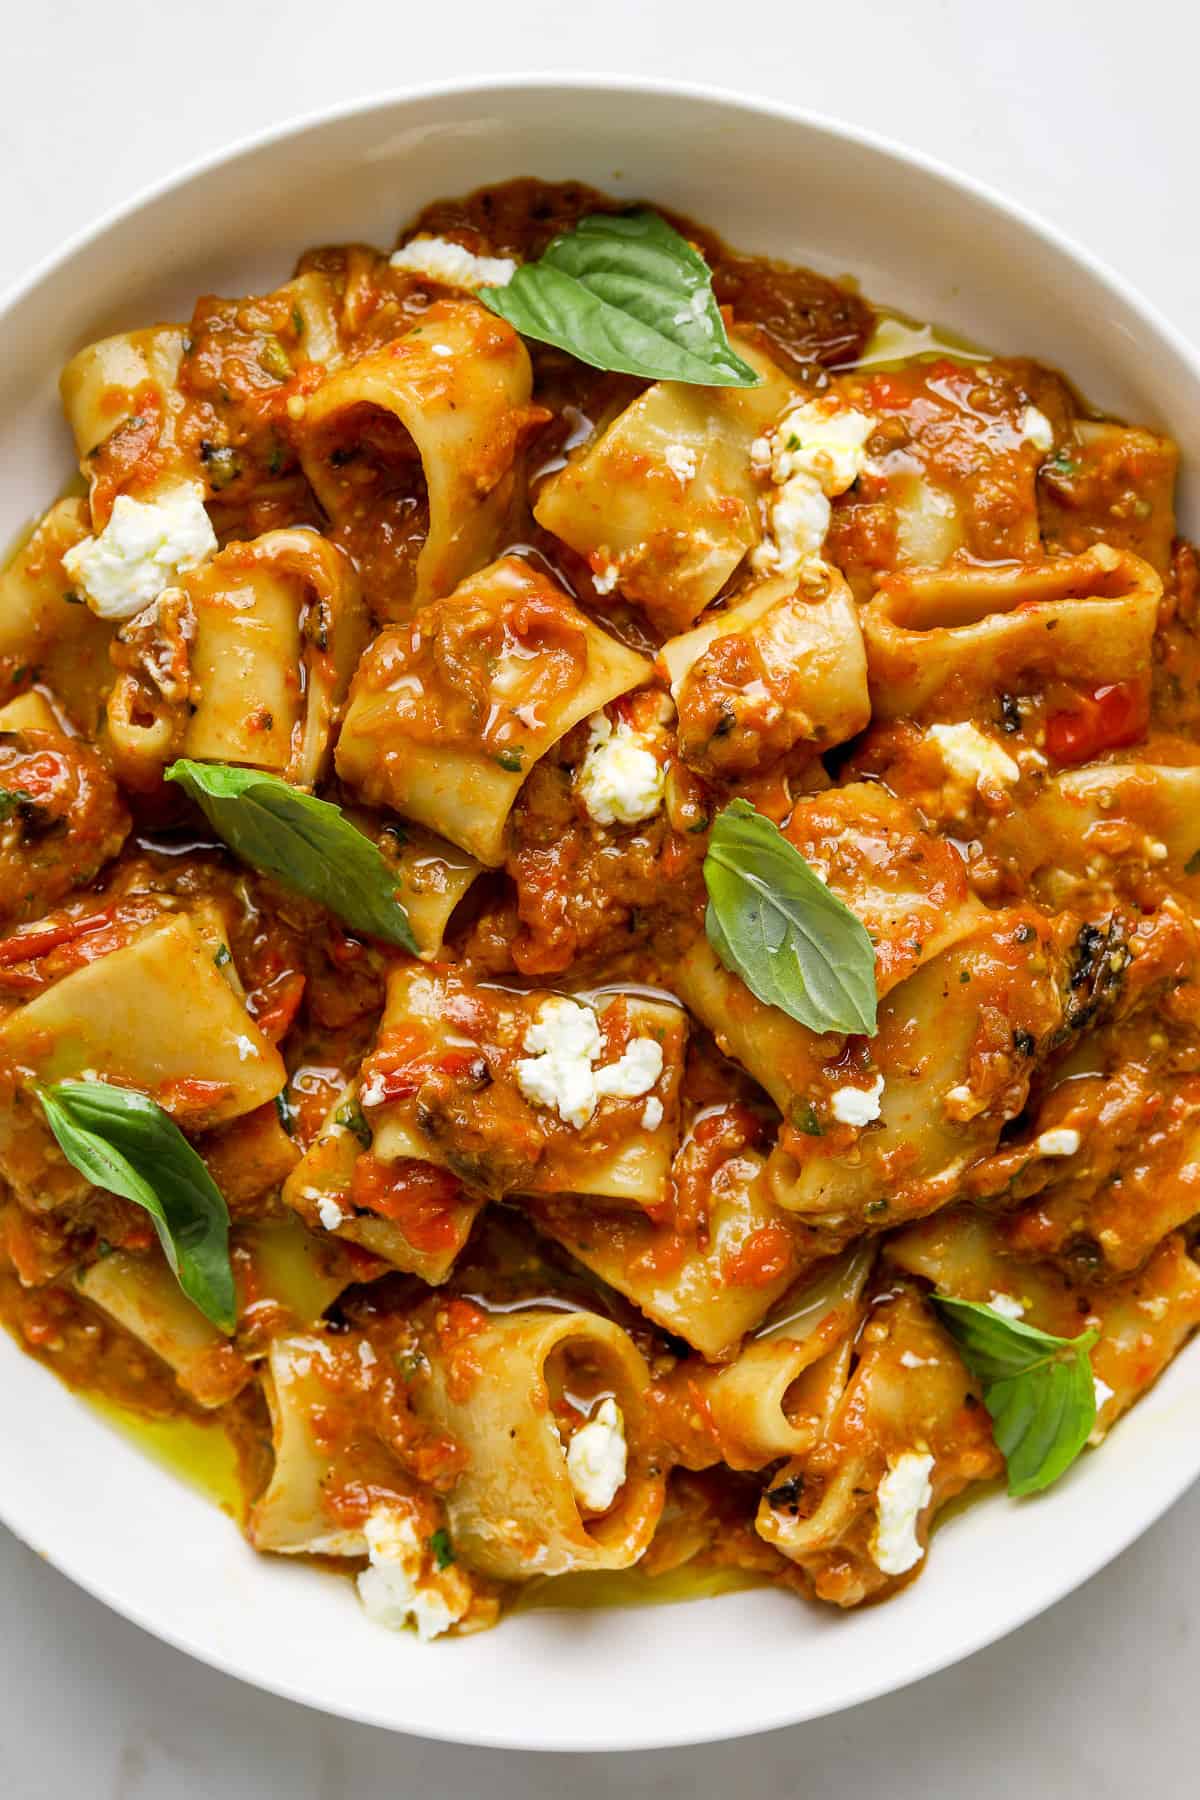 A white bowl filled with pasta tossed in a a roasted tomato eggplant sauce and topped with fresh basil leaves and crumbled goat cheese.